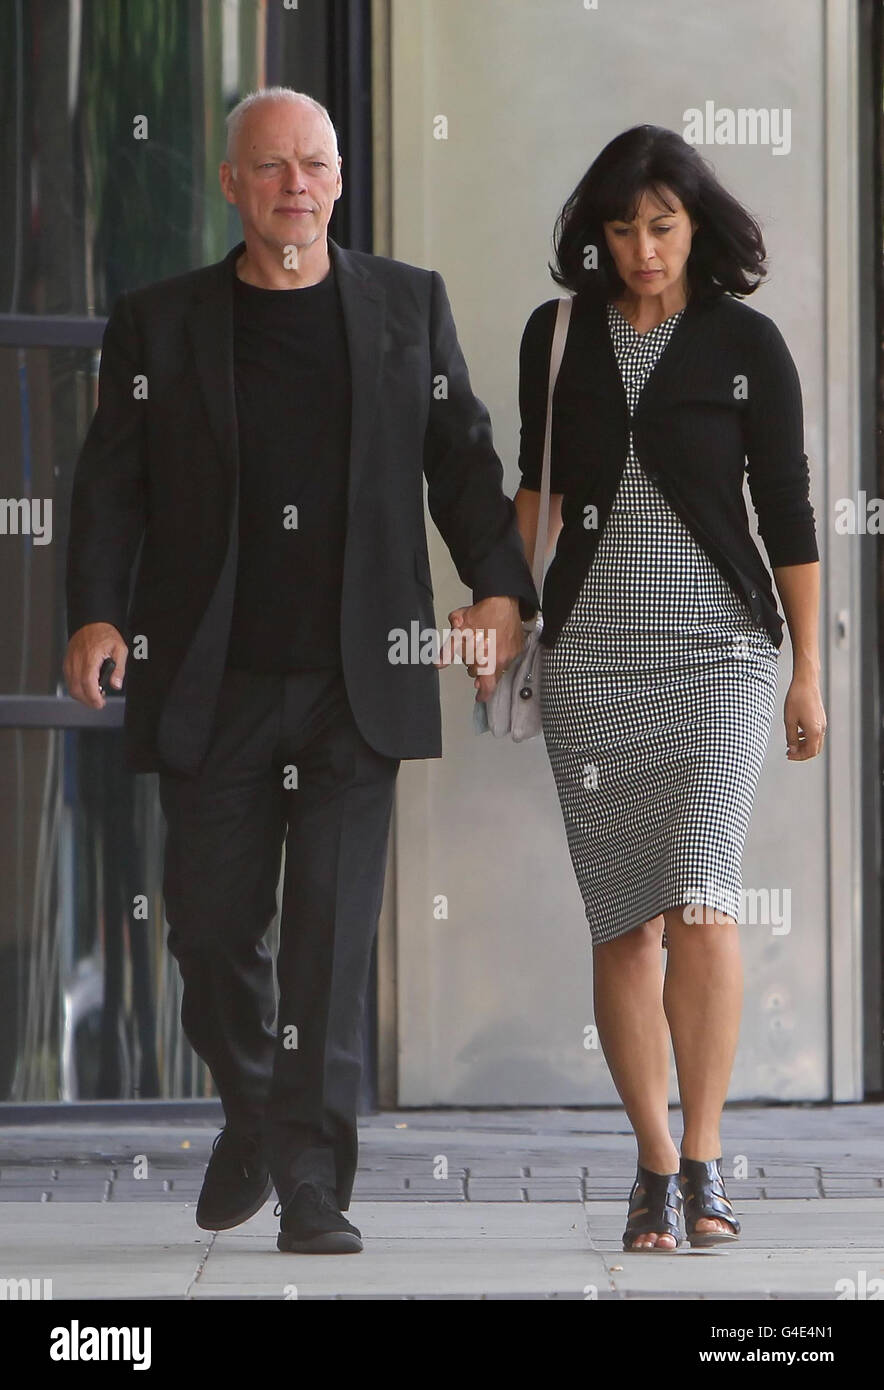 David Gilmour and his wife Polly Samson leave Kingston Crown Court following the sentencing of their son Charlie Gilmour who has been jailed for 16 months for going on a drink and drug-fuelled rampage at a student fees protest. Stock Photo